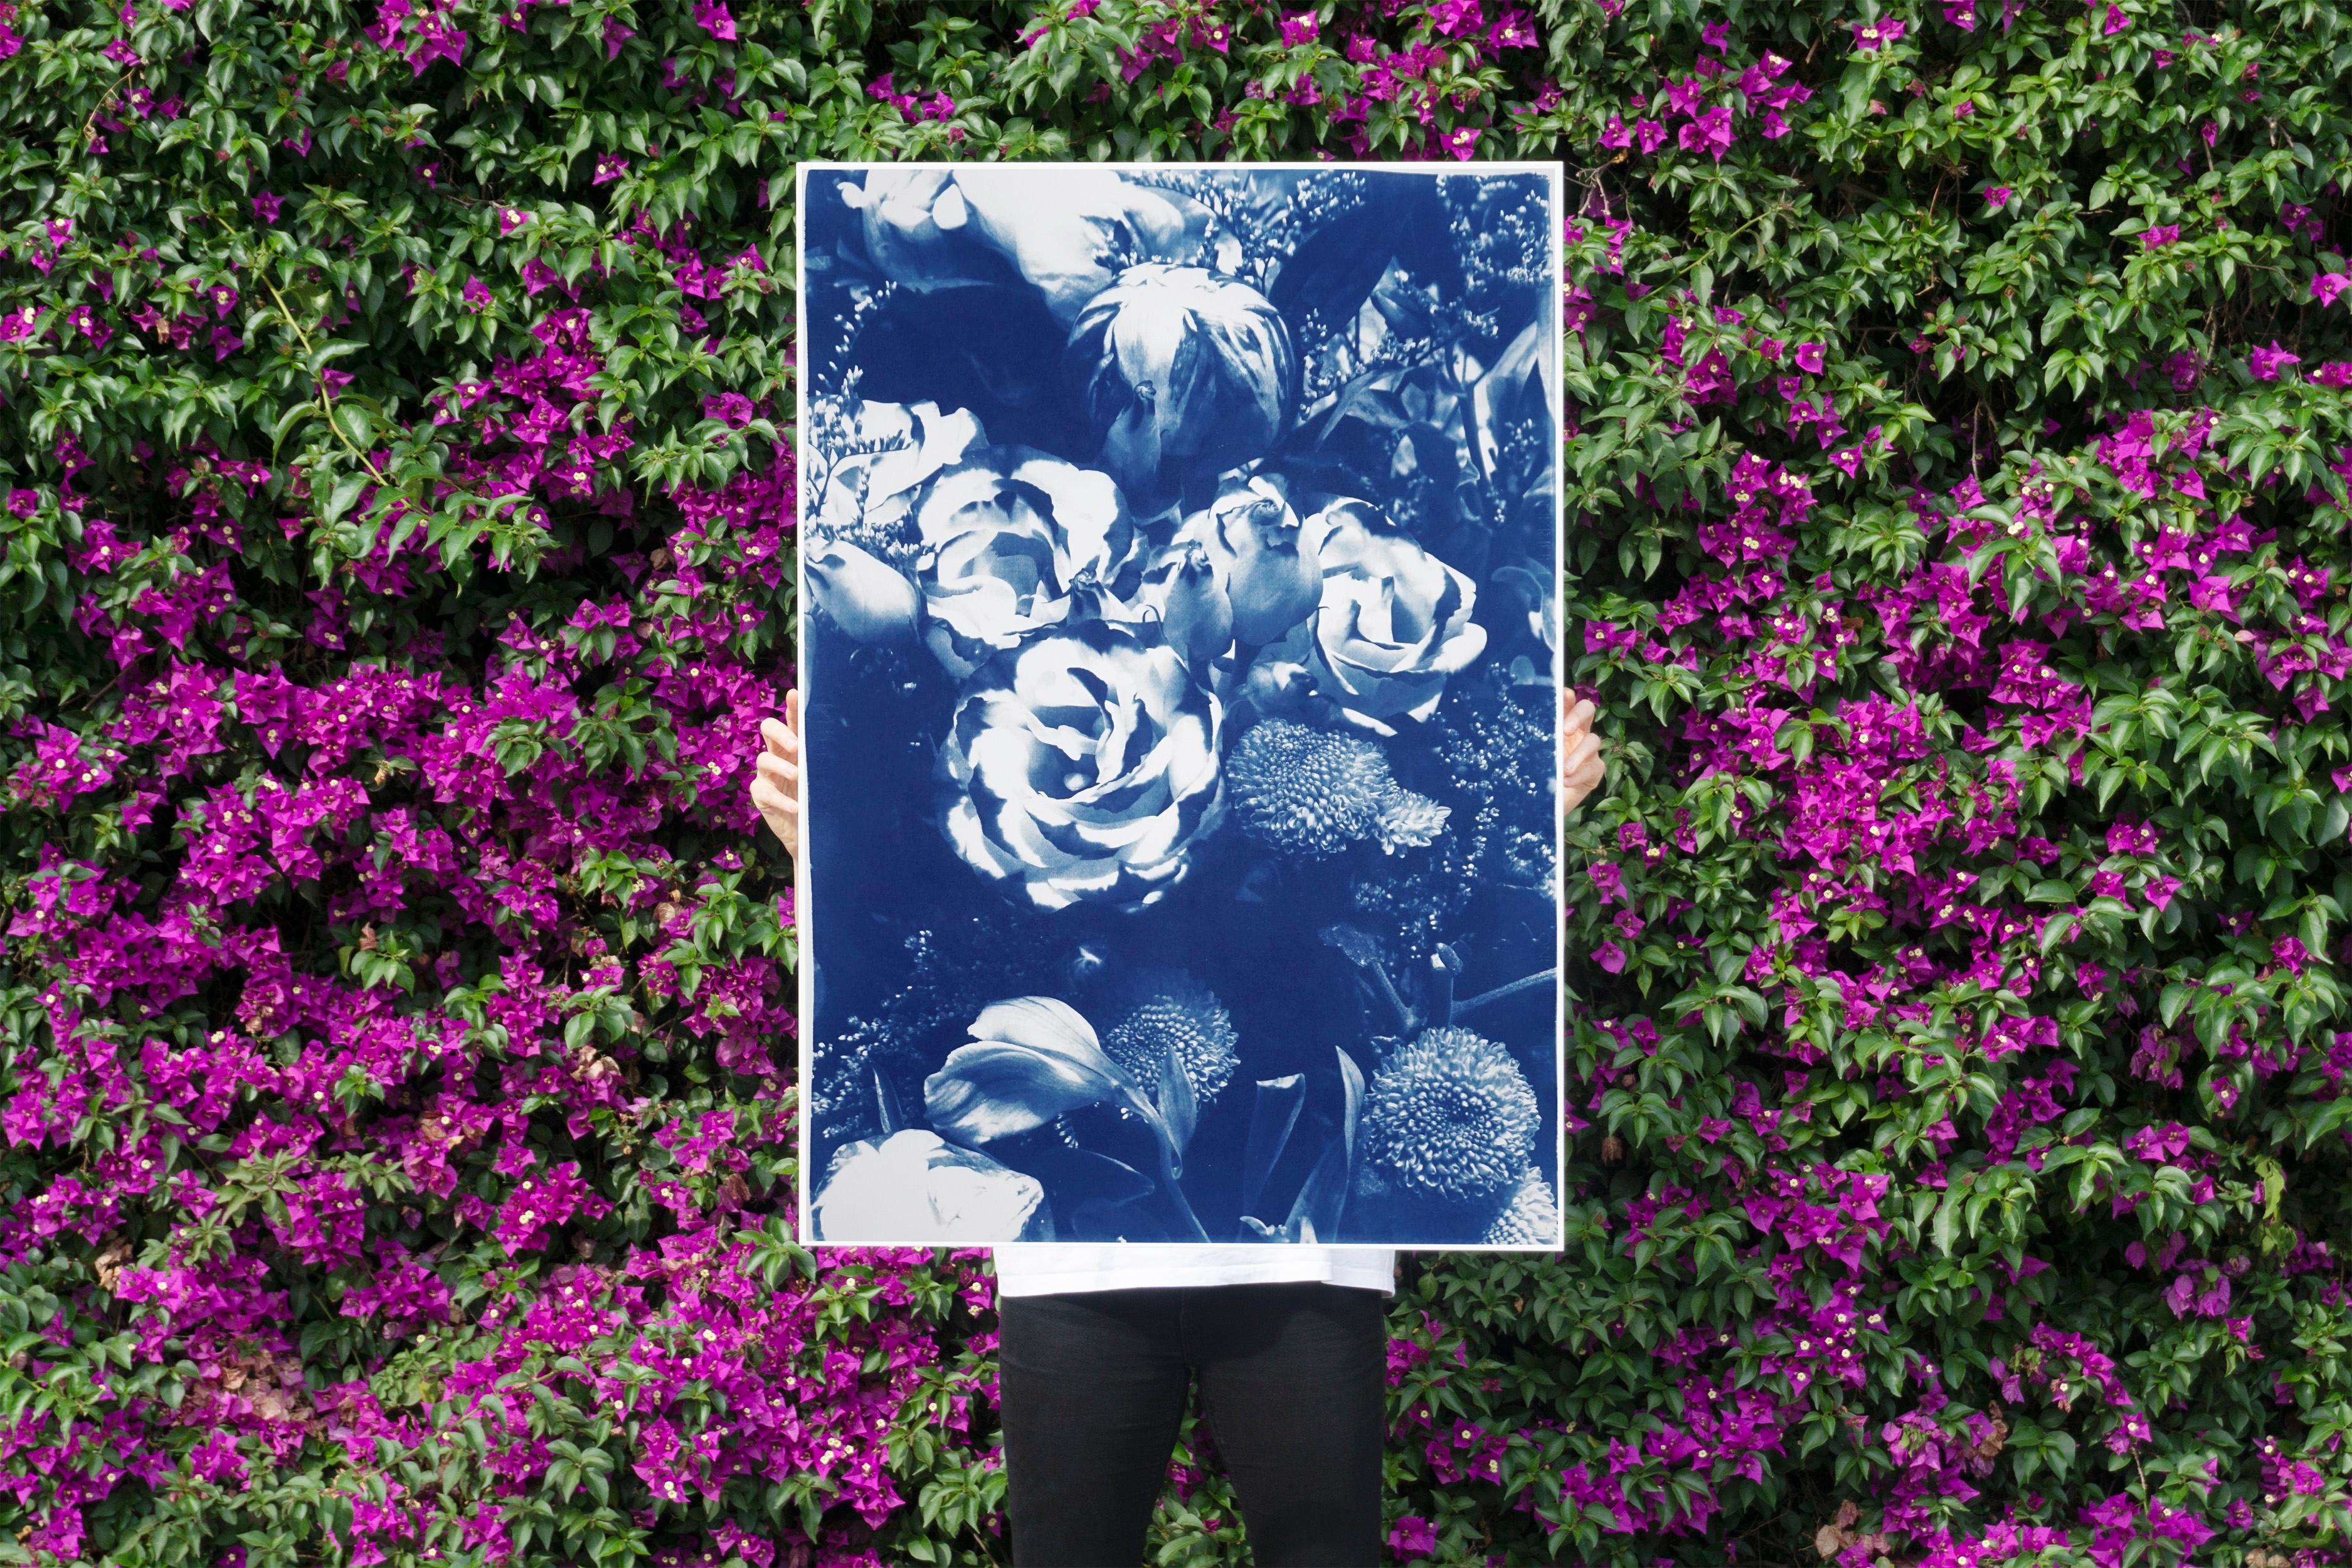 This is an exclusive handprinted limited edition cyanotype of a gorgeous blue bouquet. 

Details:
+ Title: Blue Flower Bouquet
+ Year: 2022
+ Edition Size: 100
+ Stamped and Certificate of Authenticity provided
+ Measurements : 70x100 cm (28x 40